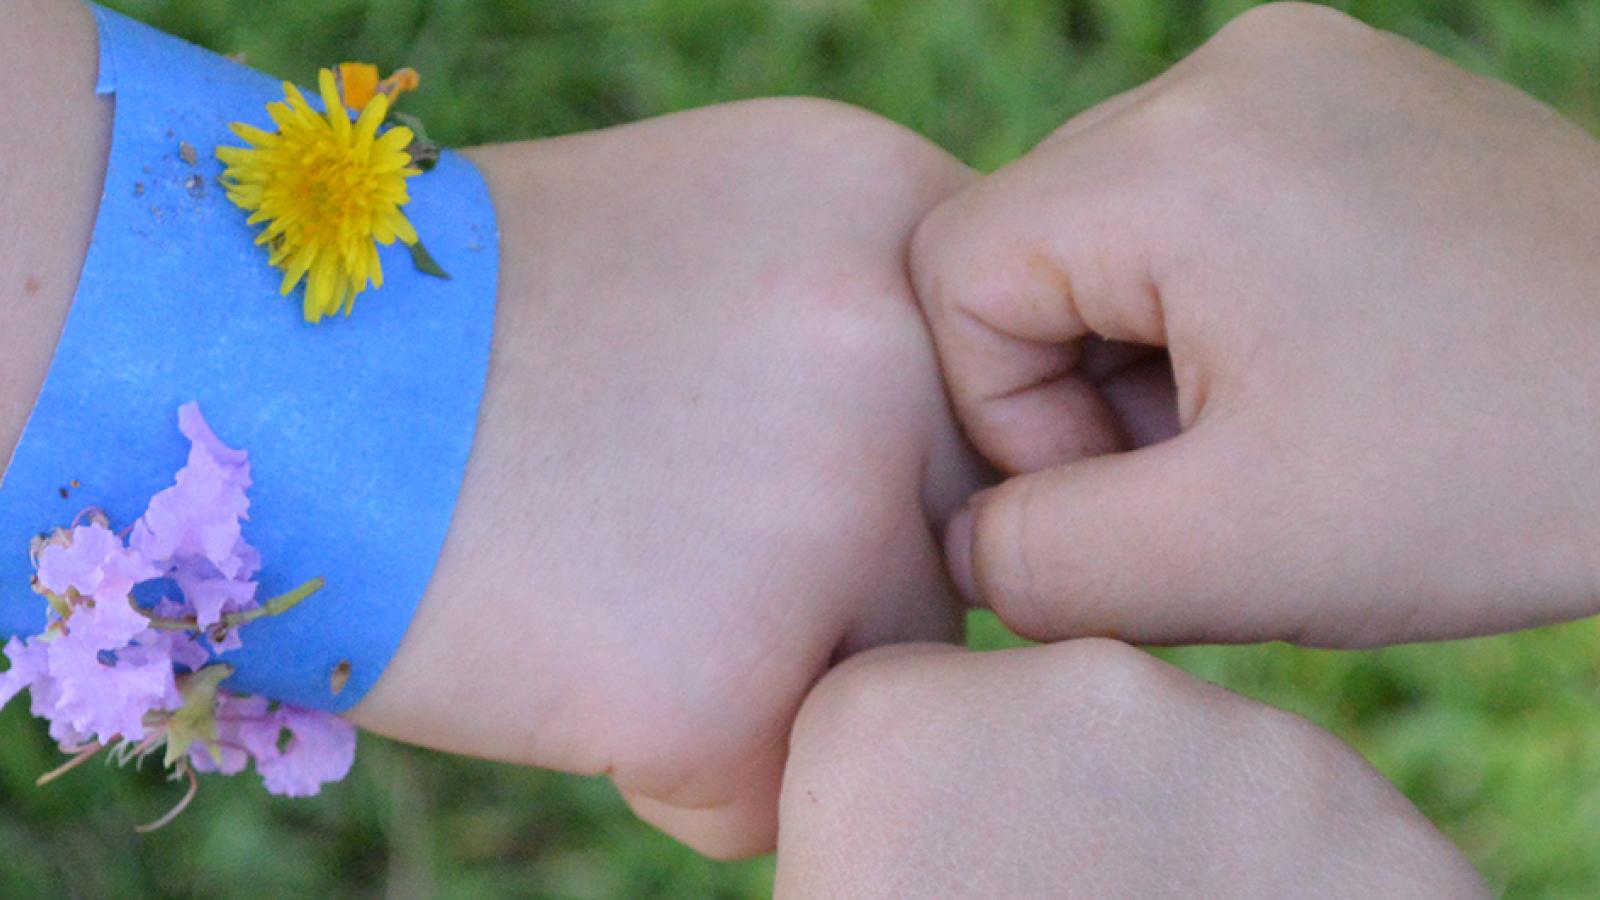 children showing off bracelets made from flowers